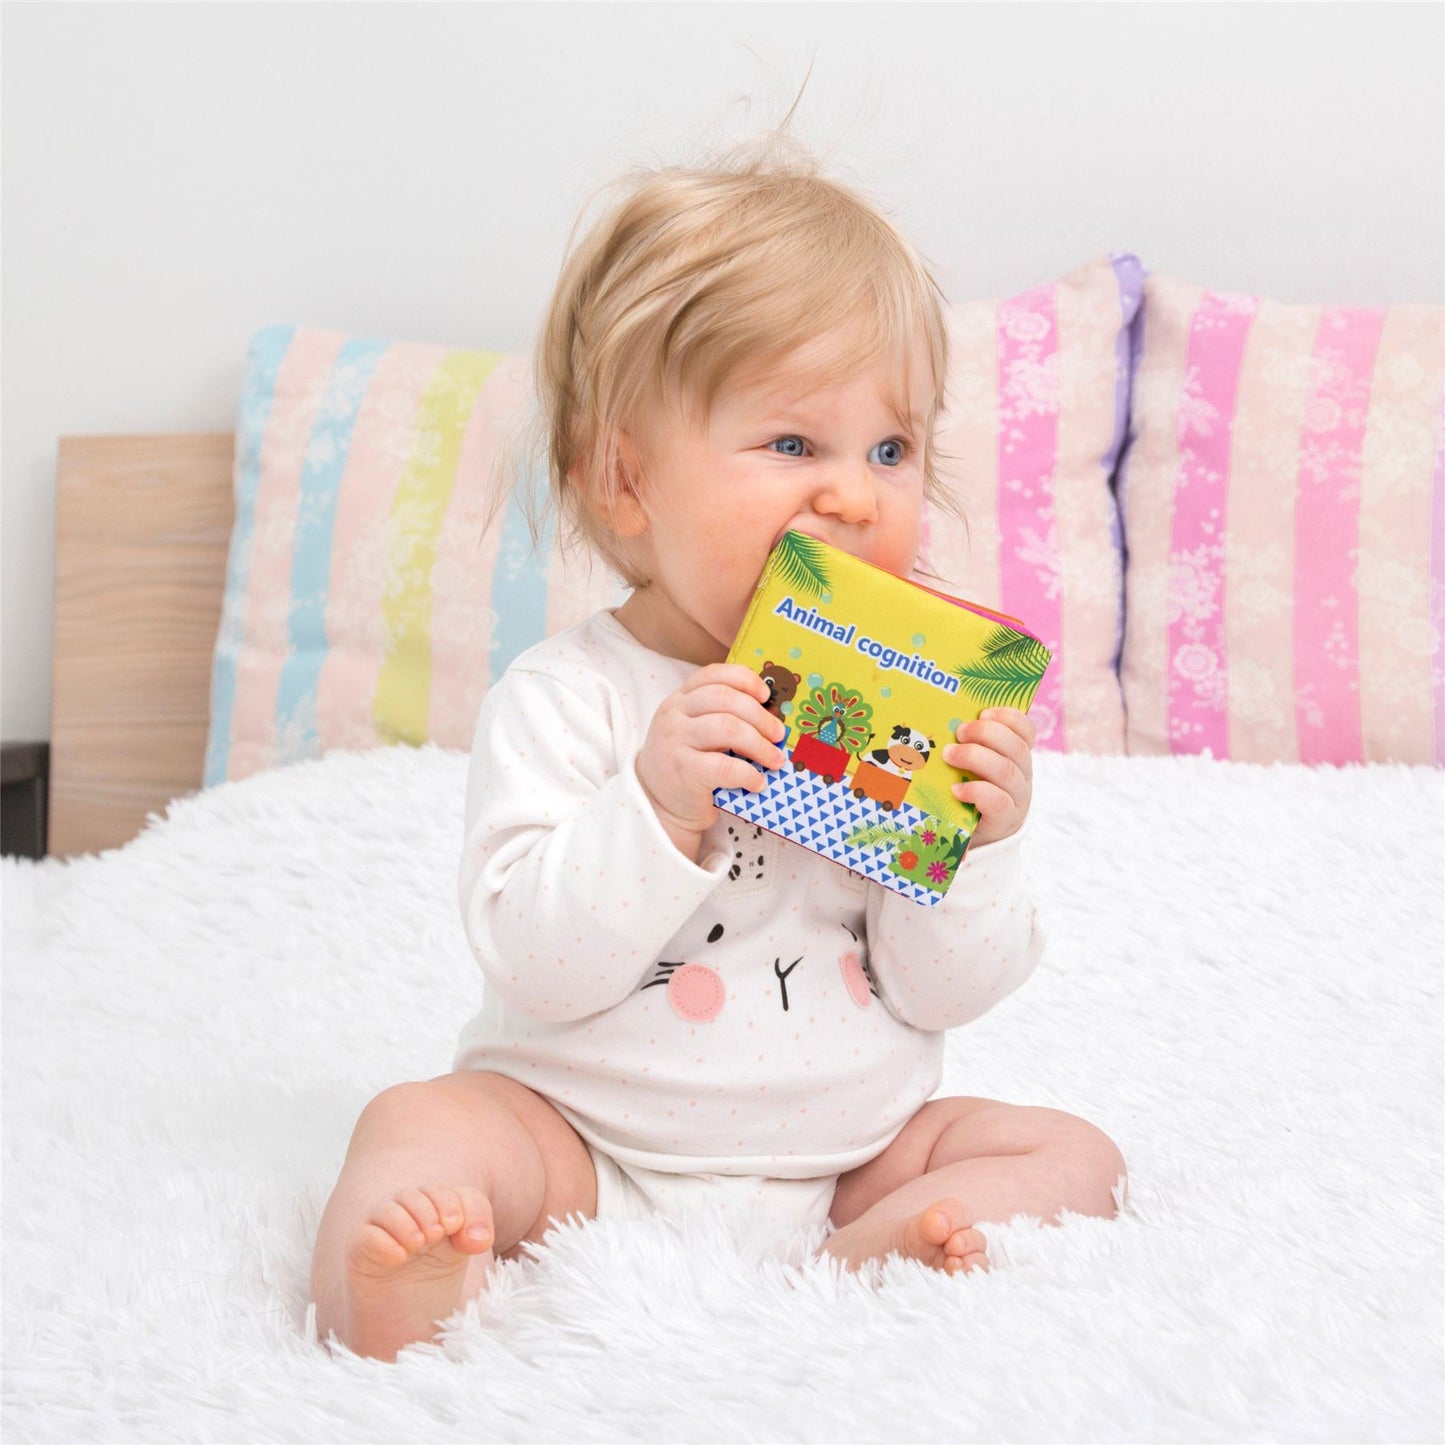 6 Soft Sensory Books For Babies & Toddlers